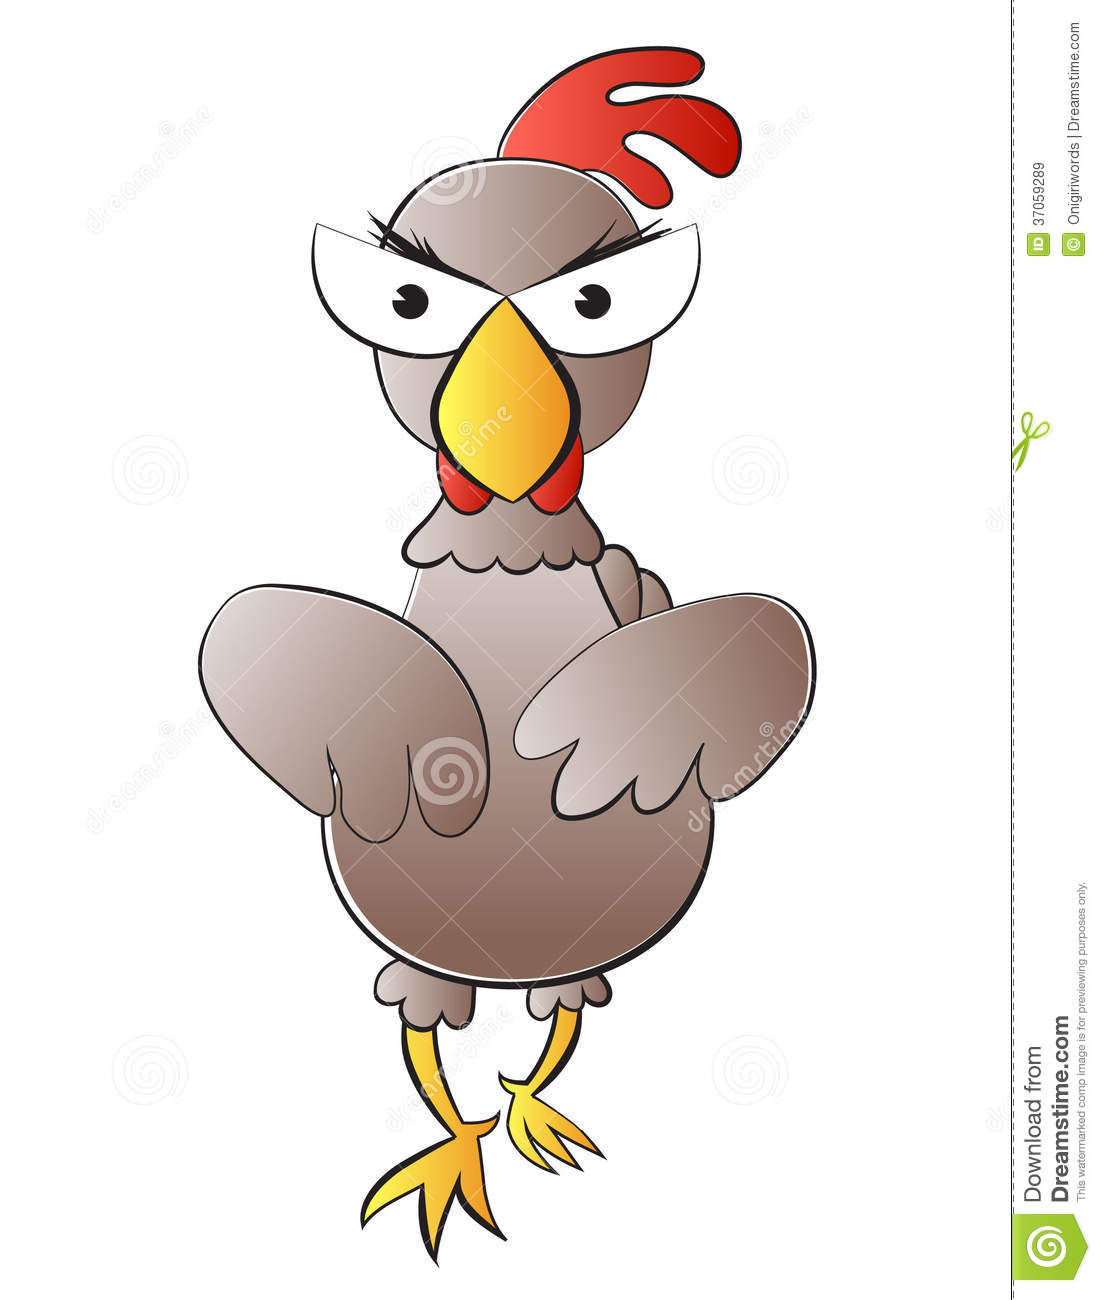 Rooster Royalty Free Stock Images   Image  37059289